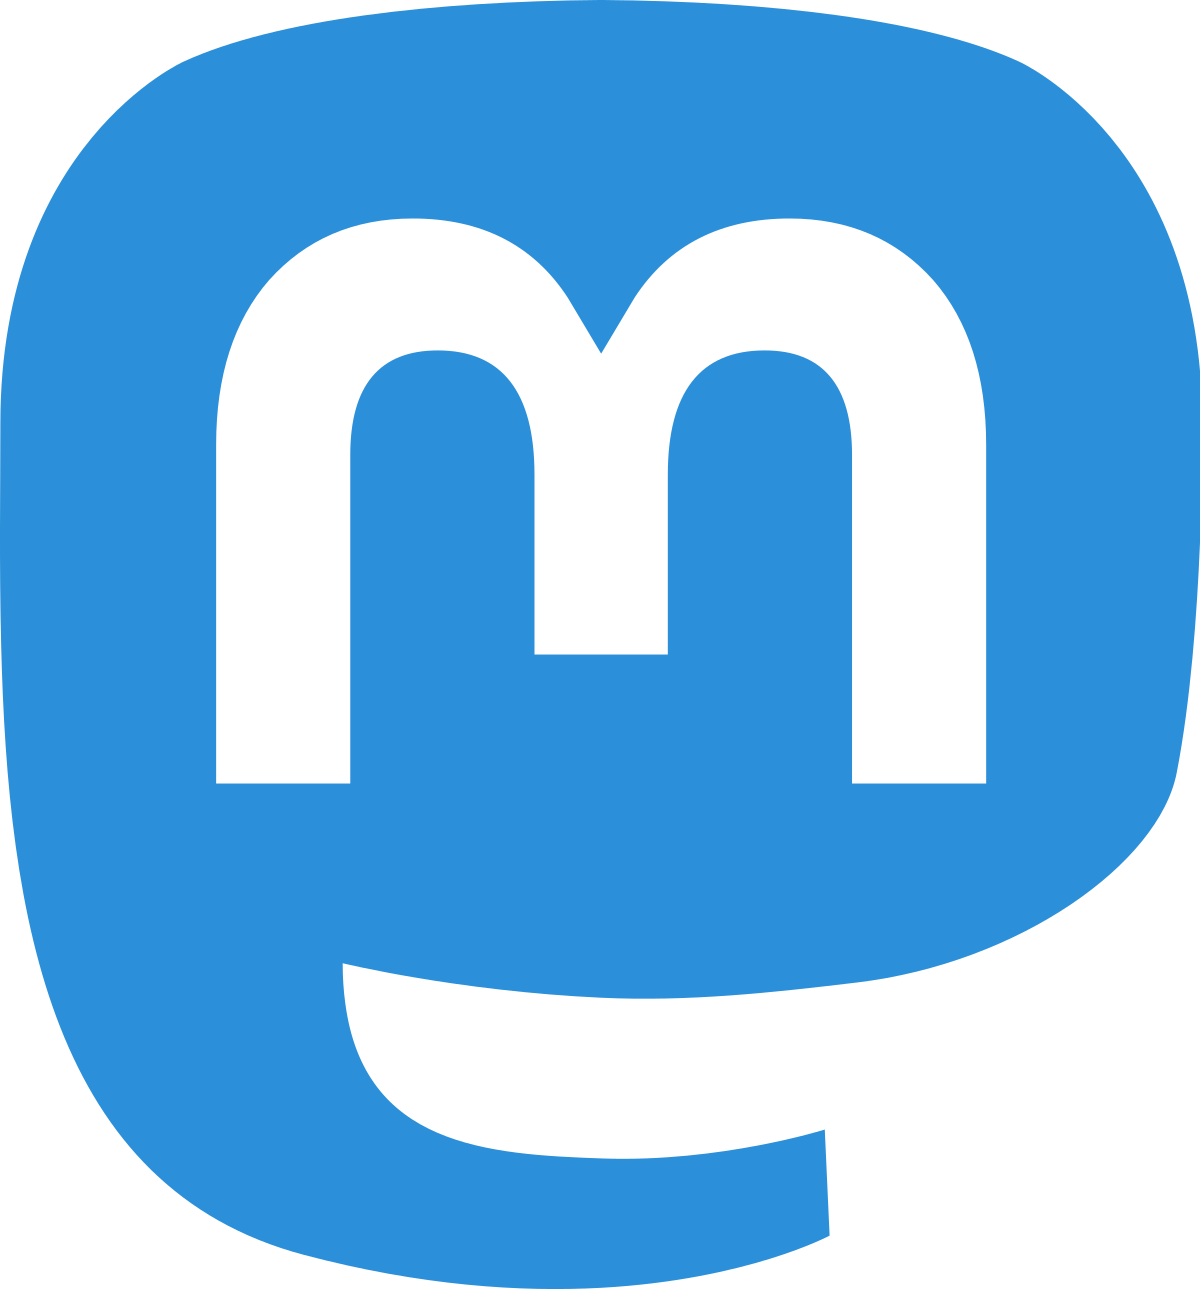 Connect with me on Mastodon